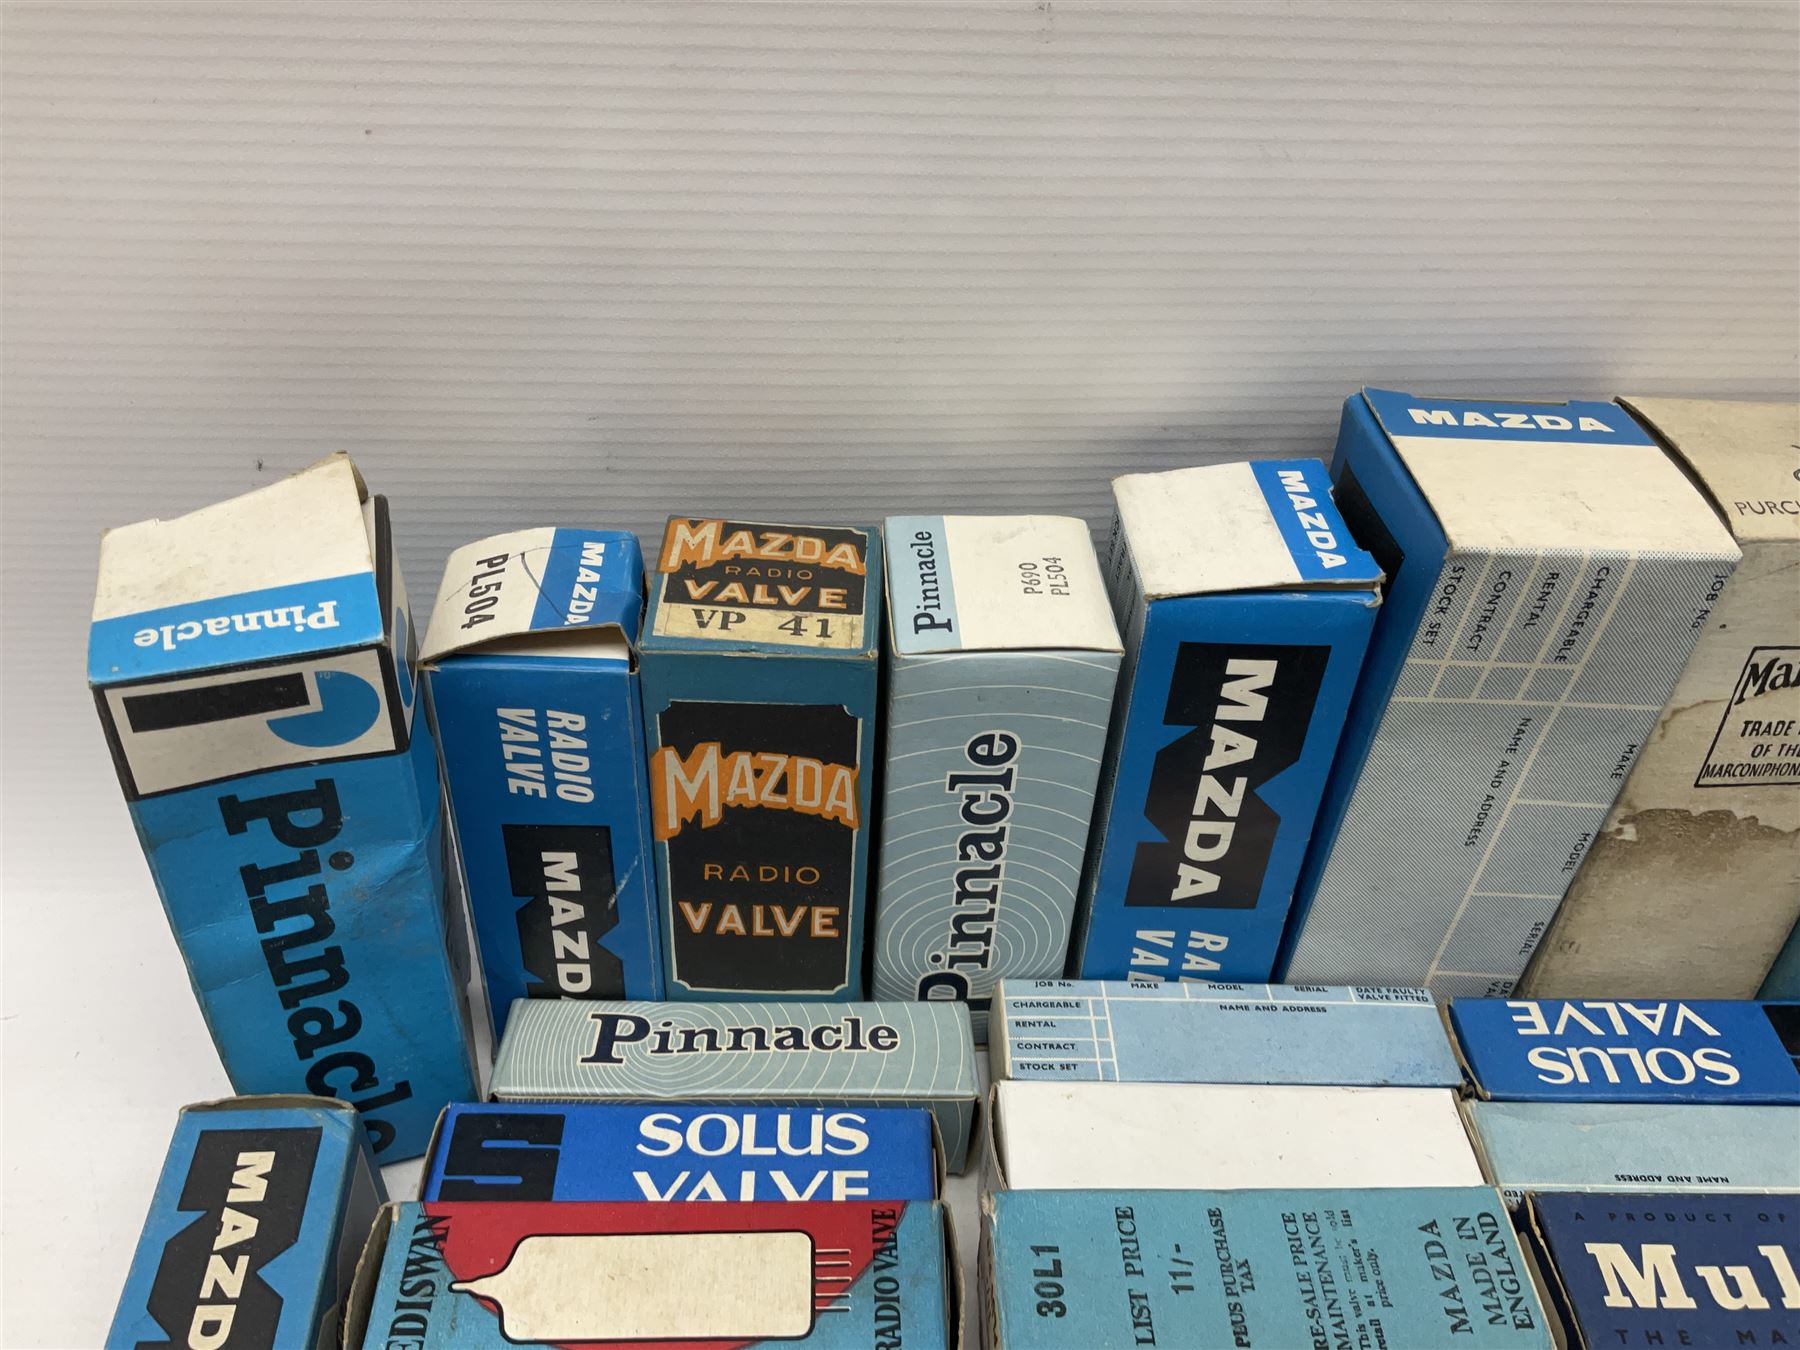 Collection of empty boxes for Pinnacle - Image 4 of 8